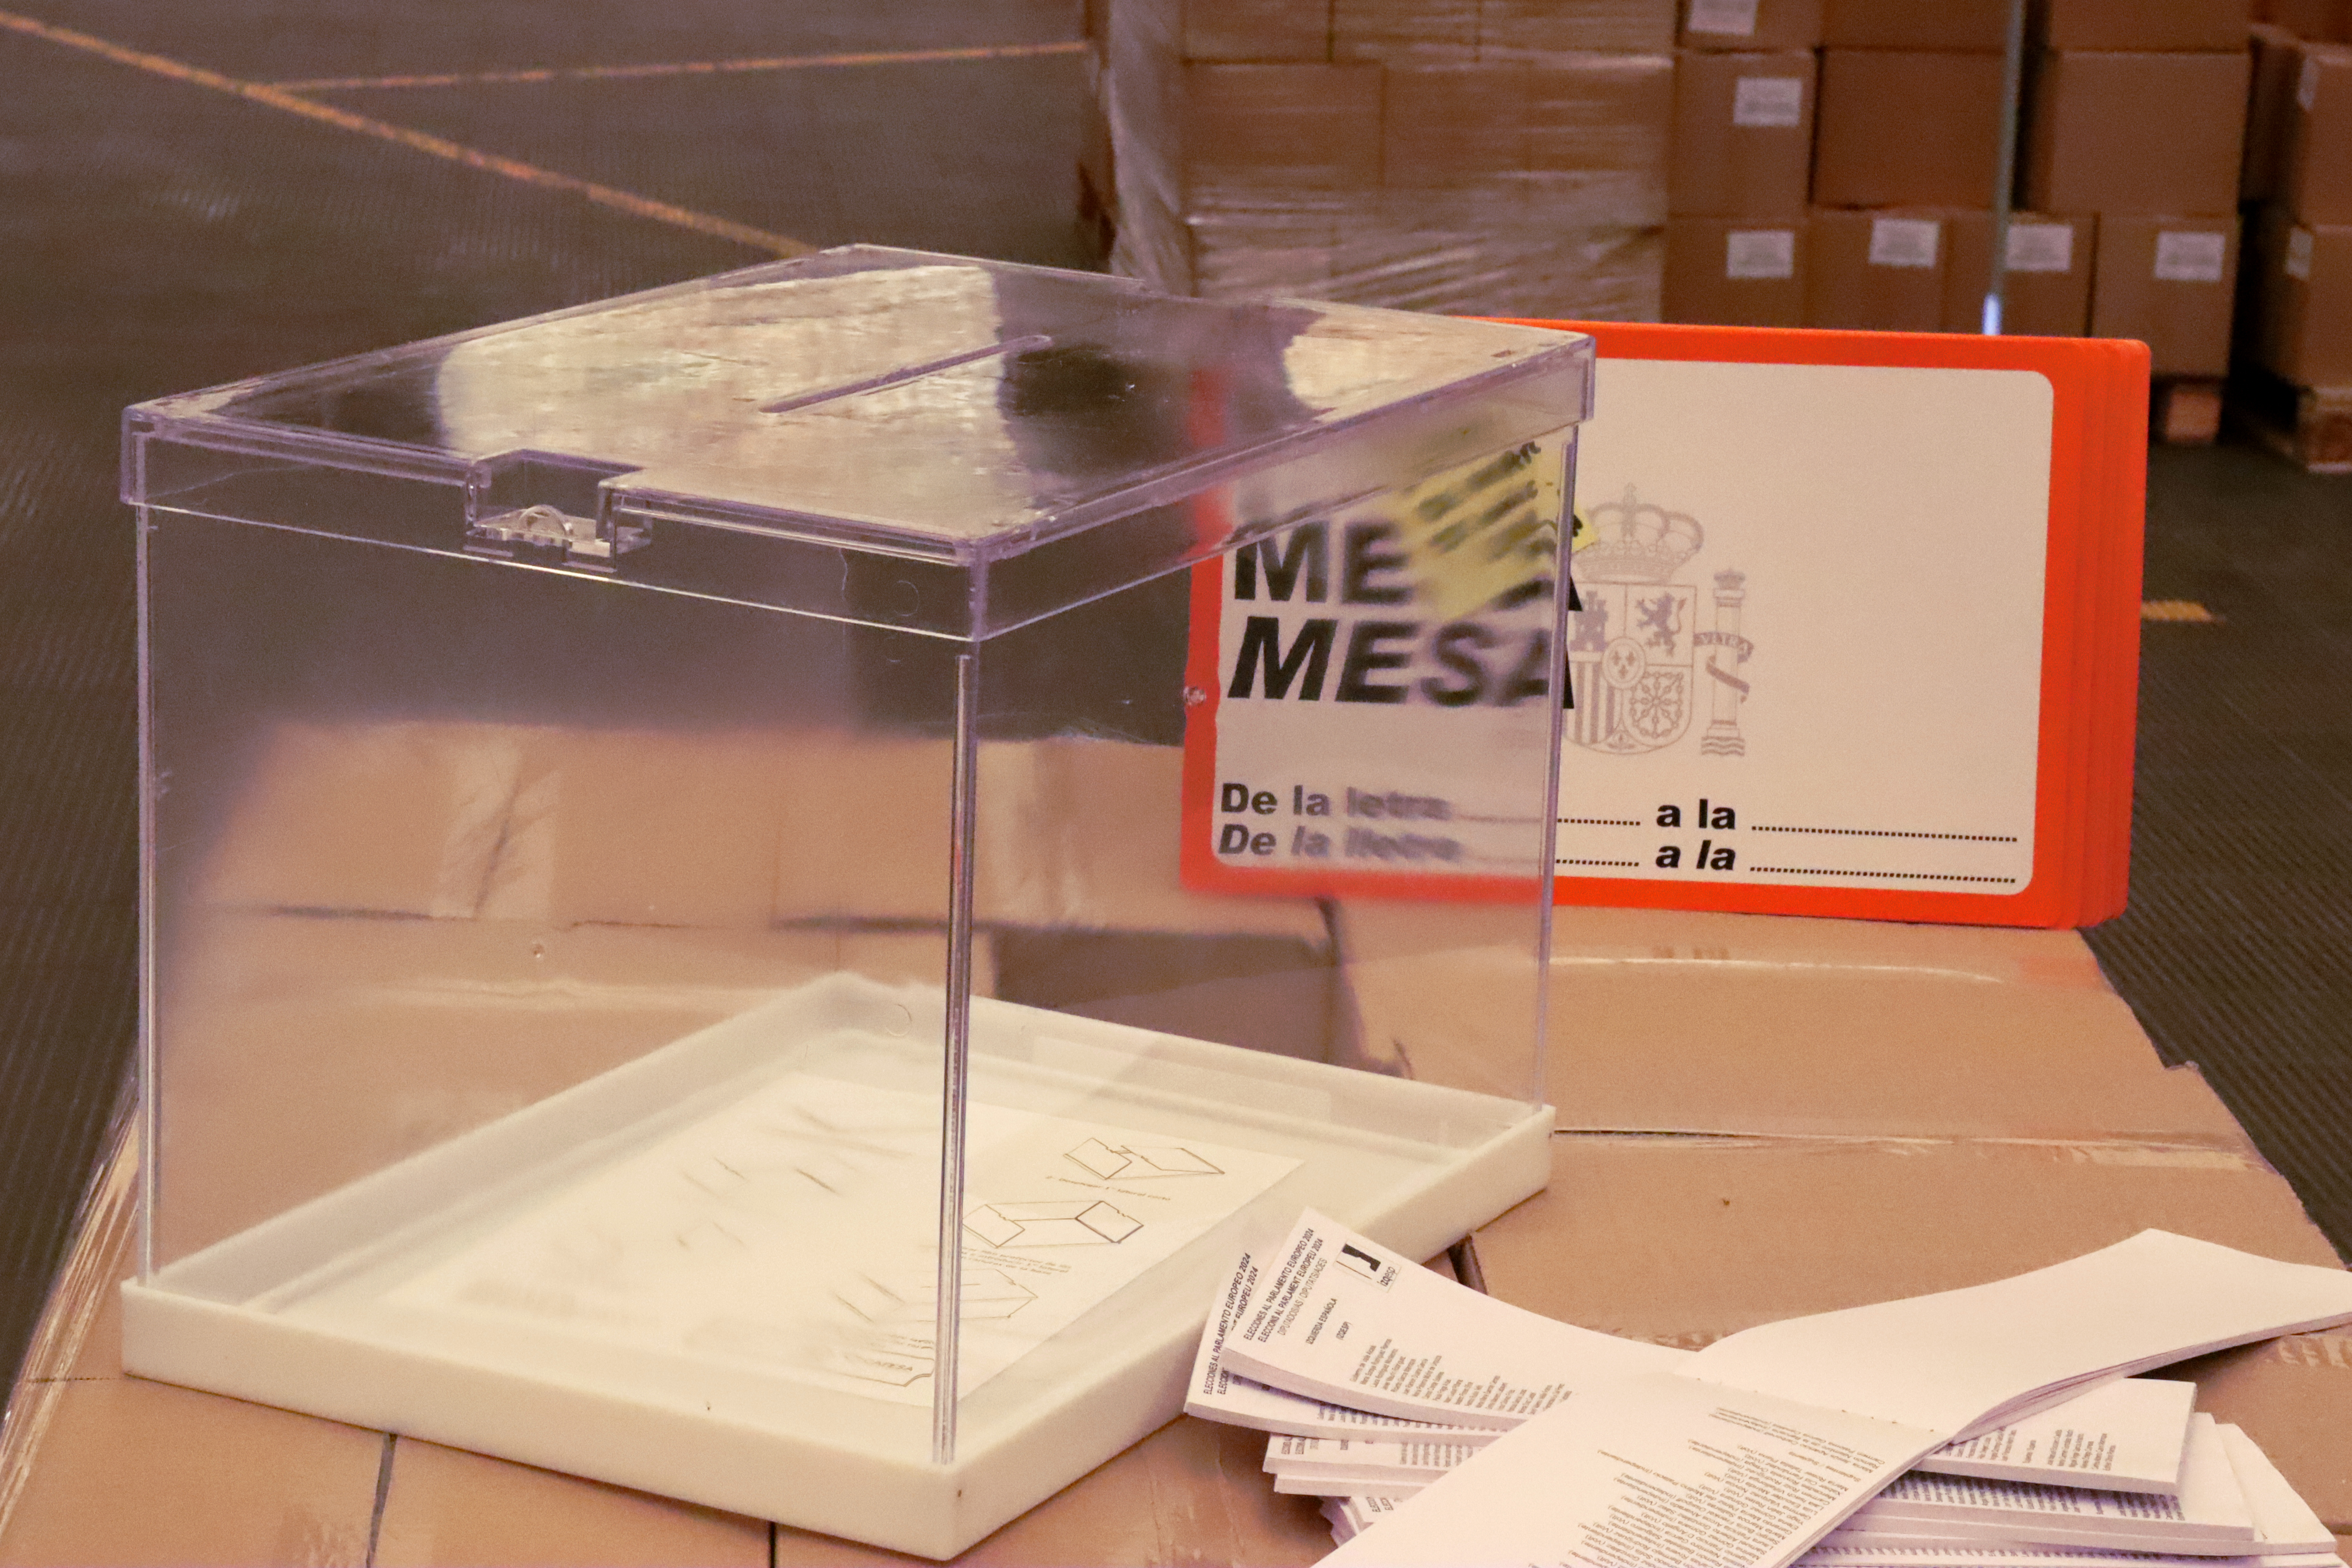 Ballots for the European elections, stored in Barcelona days before the elections